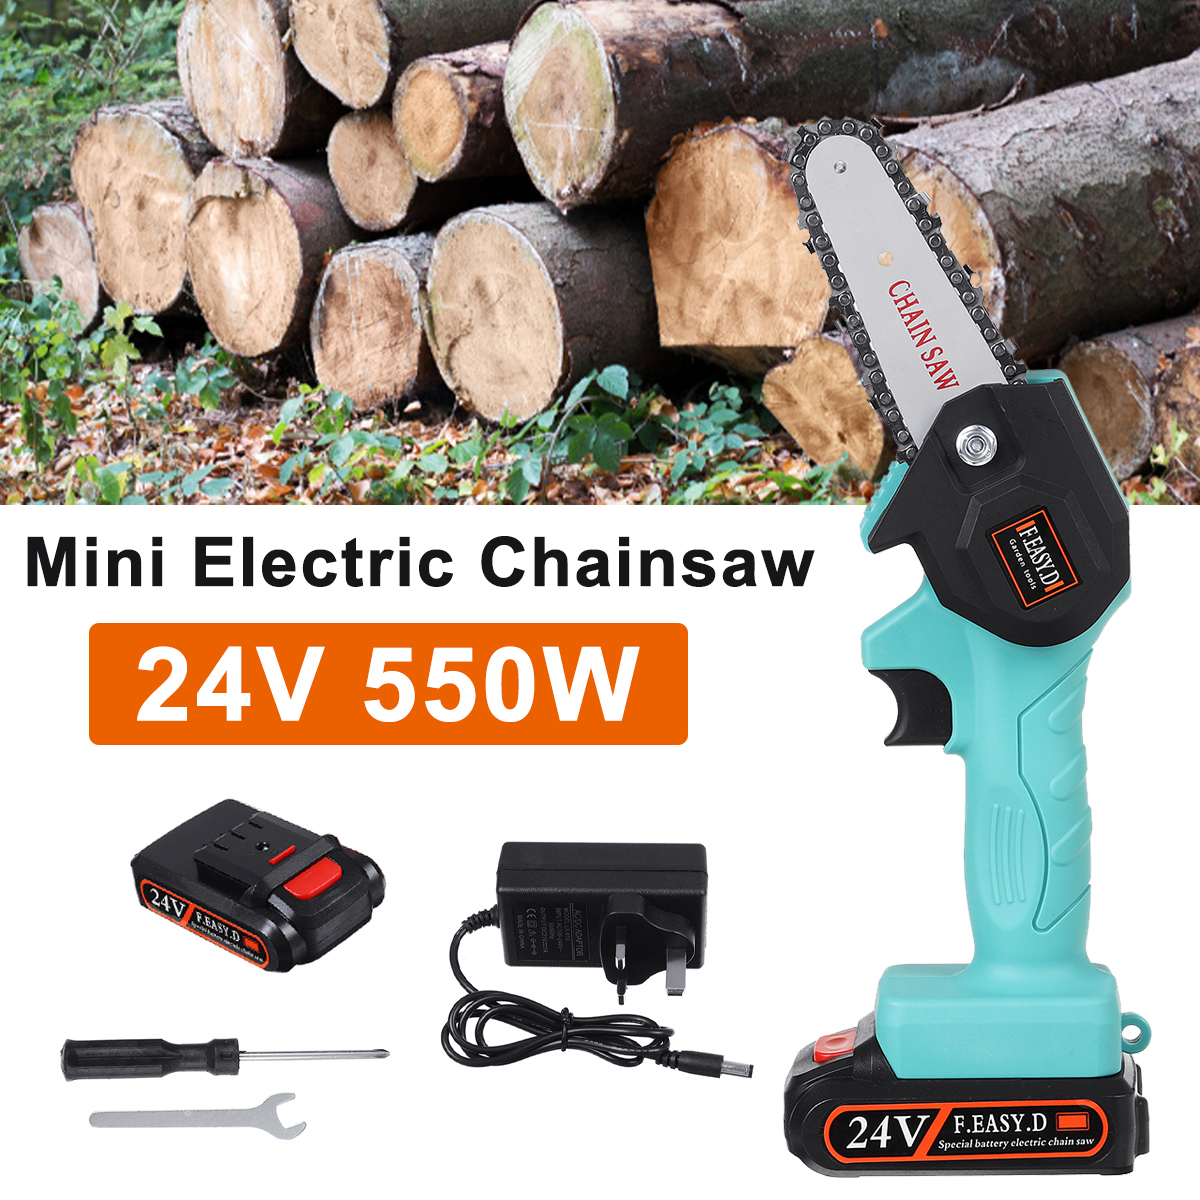 24V-550W-Rechargeable-Mini-Electric-Chainsaw-Handheld-Wood-Pruning-Saw-Kit-1777015-1